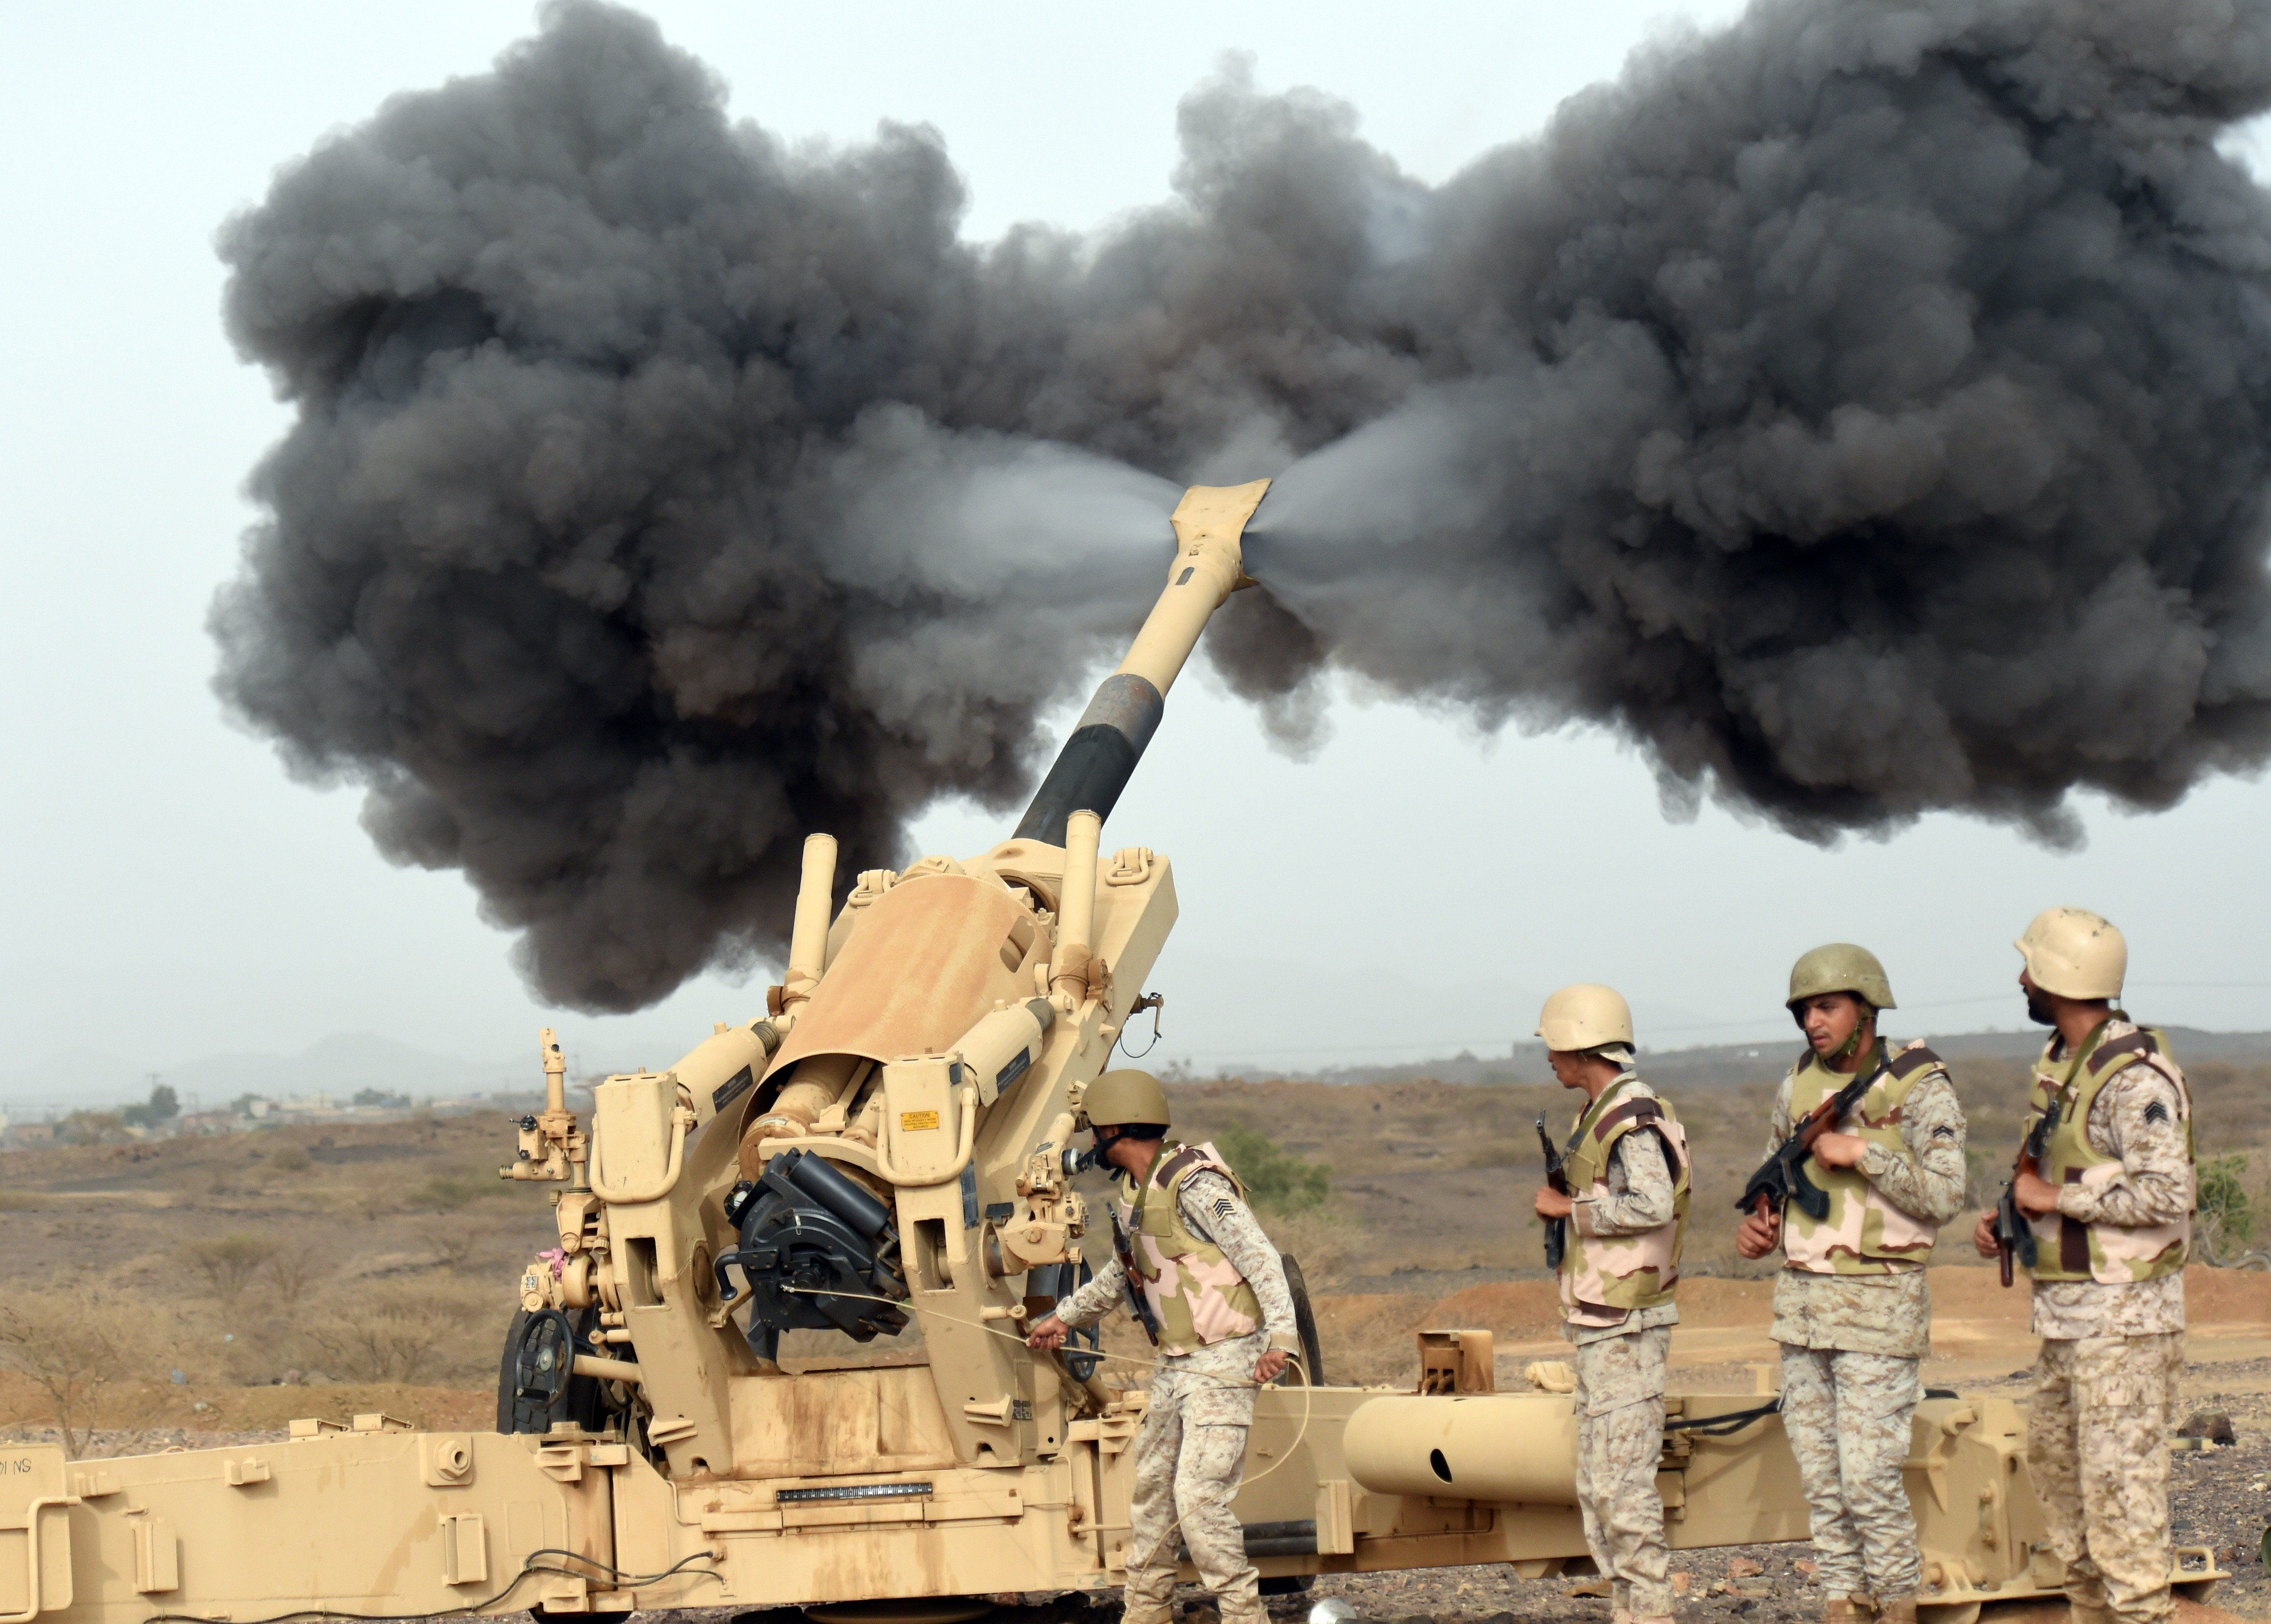 Saudi army artillery fire shells towards Yemen from a post close to the Saudi-Yemeni border, in southwestern Saudi Arabia, on April 13, 2015 . Saudi Arabia is leading a coalition of several Arab countries which since March 26 has carried out air strikes against the Shiite Huthis rebels, who overran the capital Sanaa in September and have expanded to other parts of Yemen. AFP PHOTO / FAYEZ NURELDINE (Photo credit should read FAYEZ NURELDINE/AFP via Getty Images)